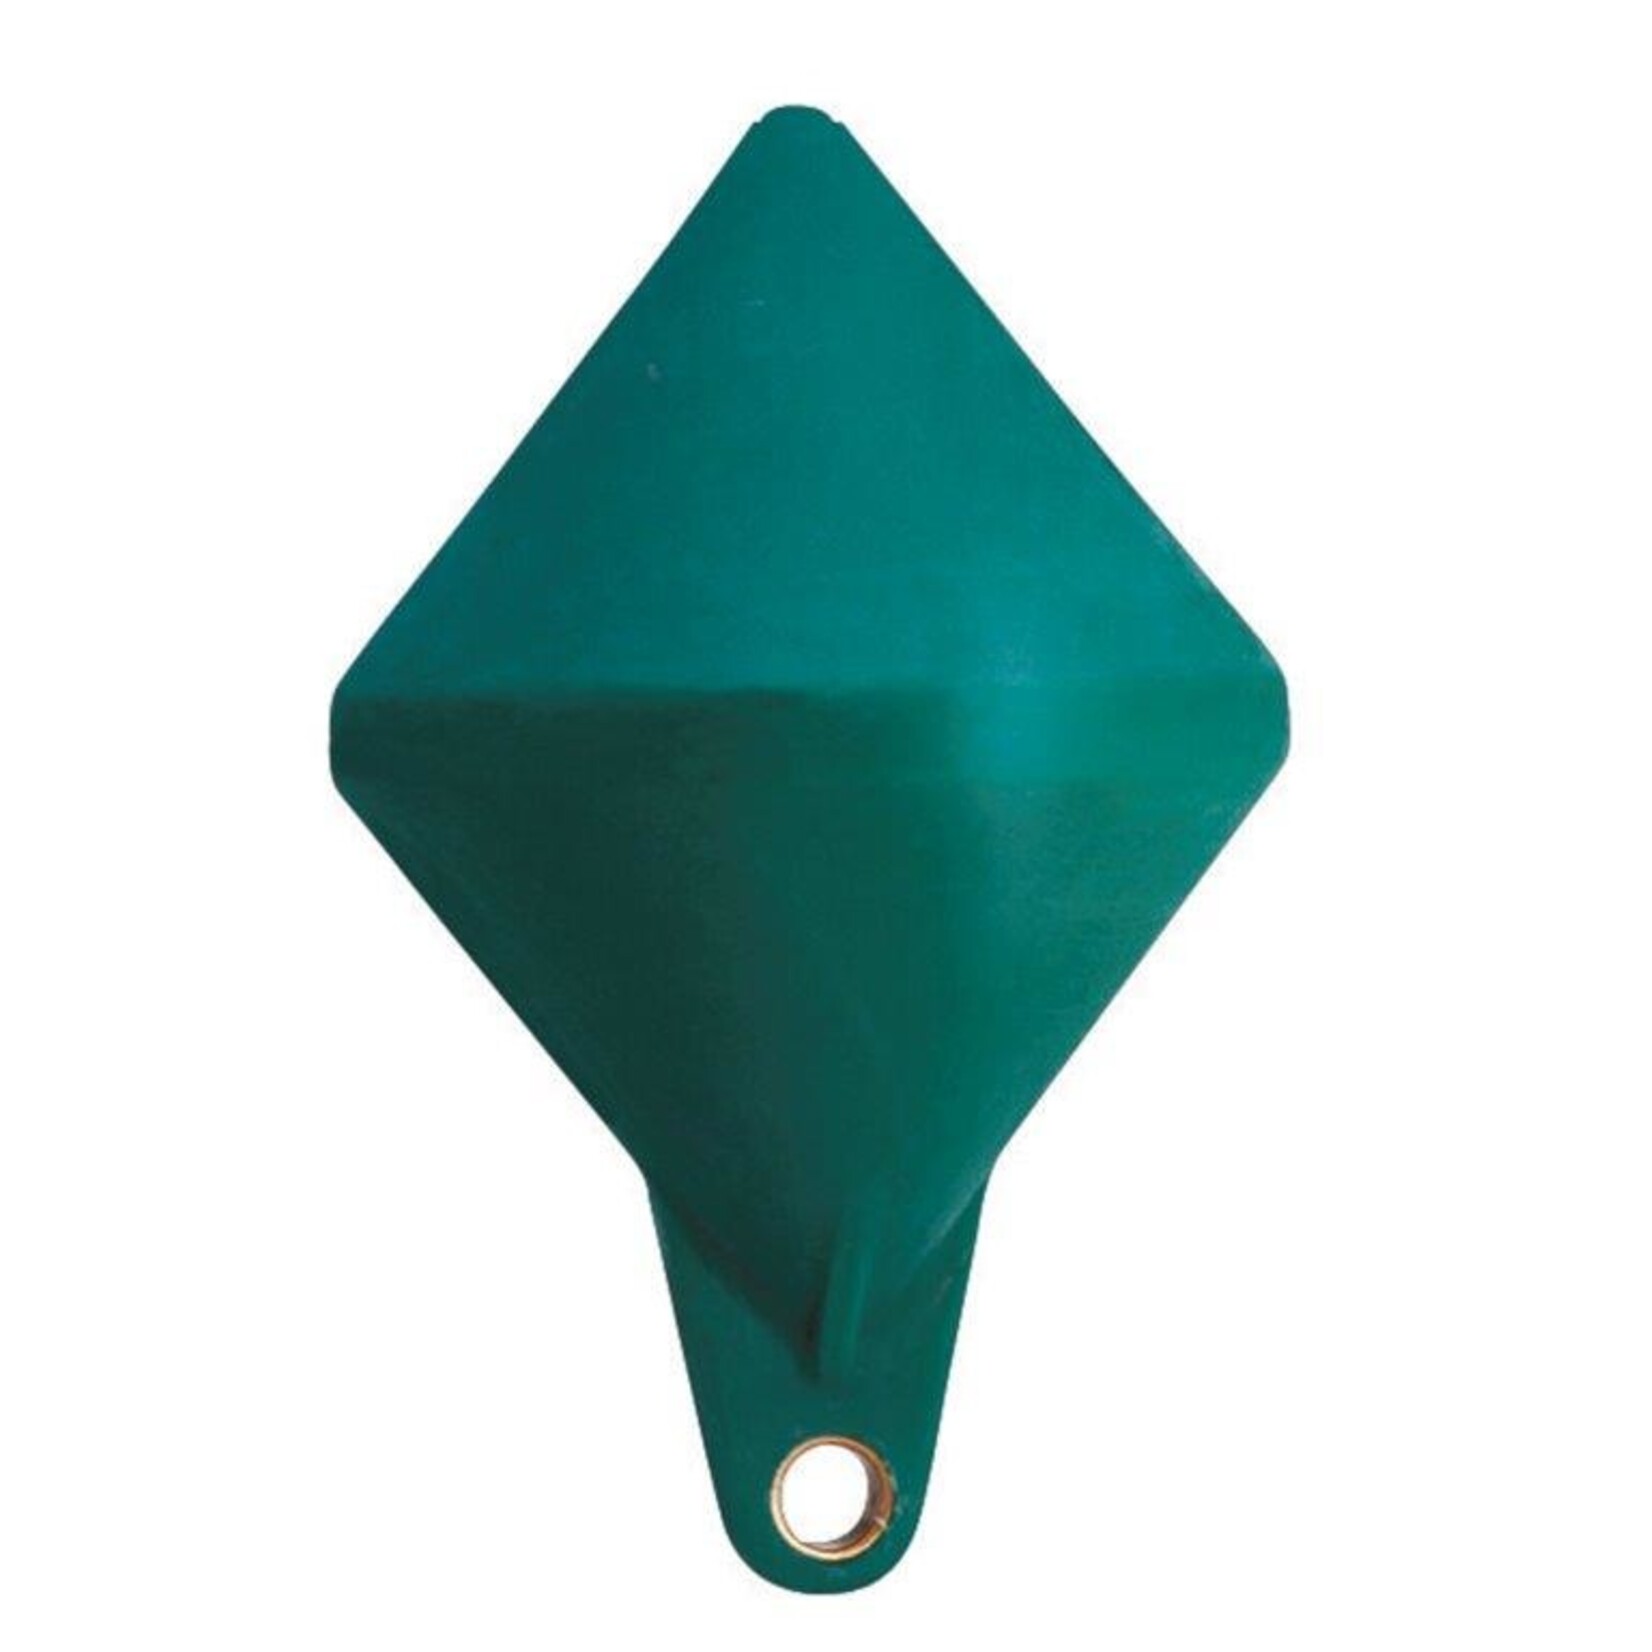 Plastimo Biconical anchor buoy green s filled